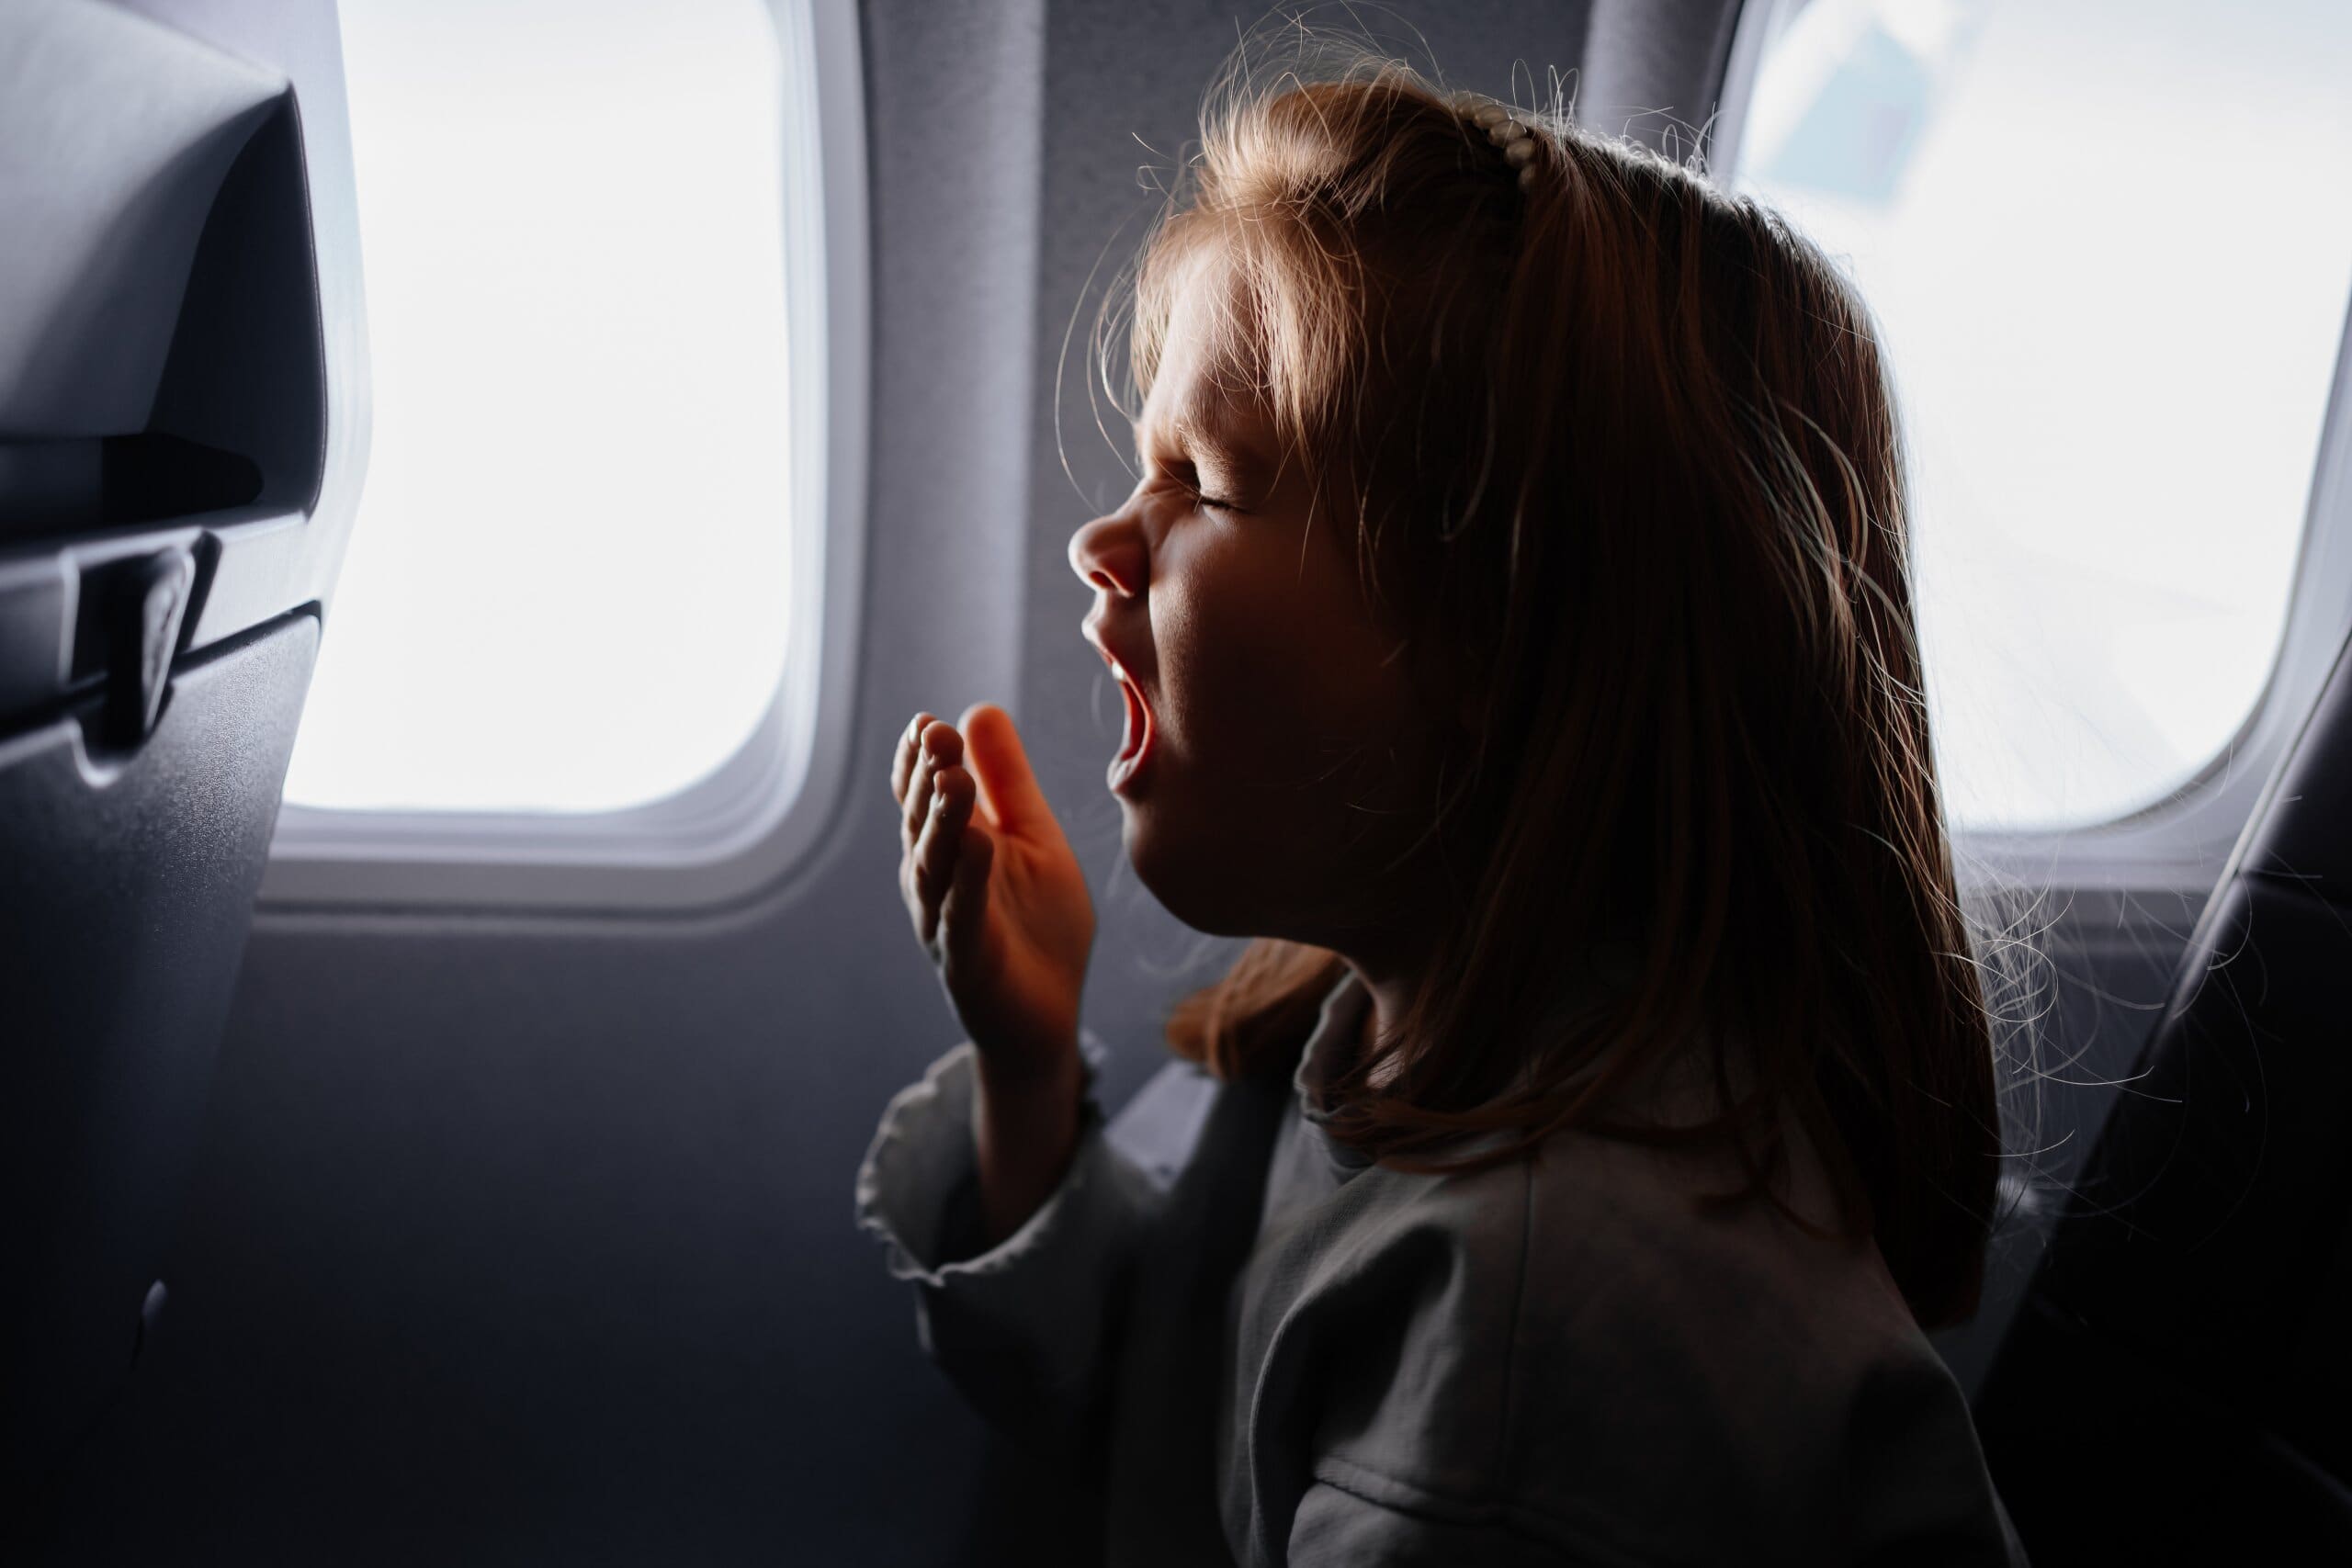 Young girl yawning into her hand in the window seat of a plane.